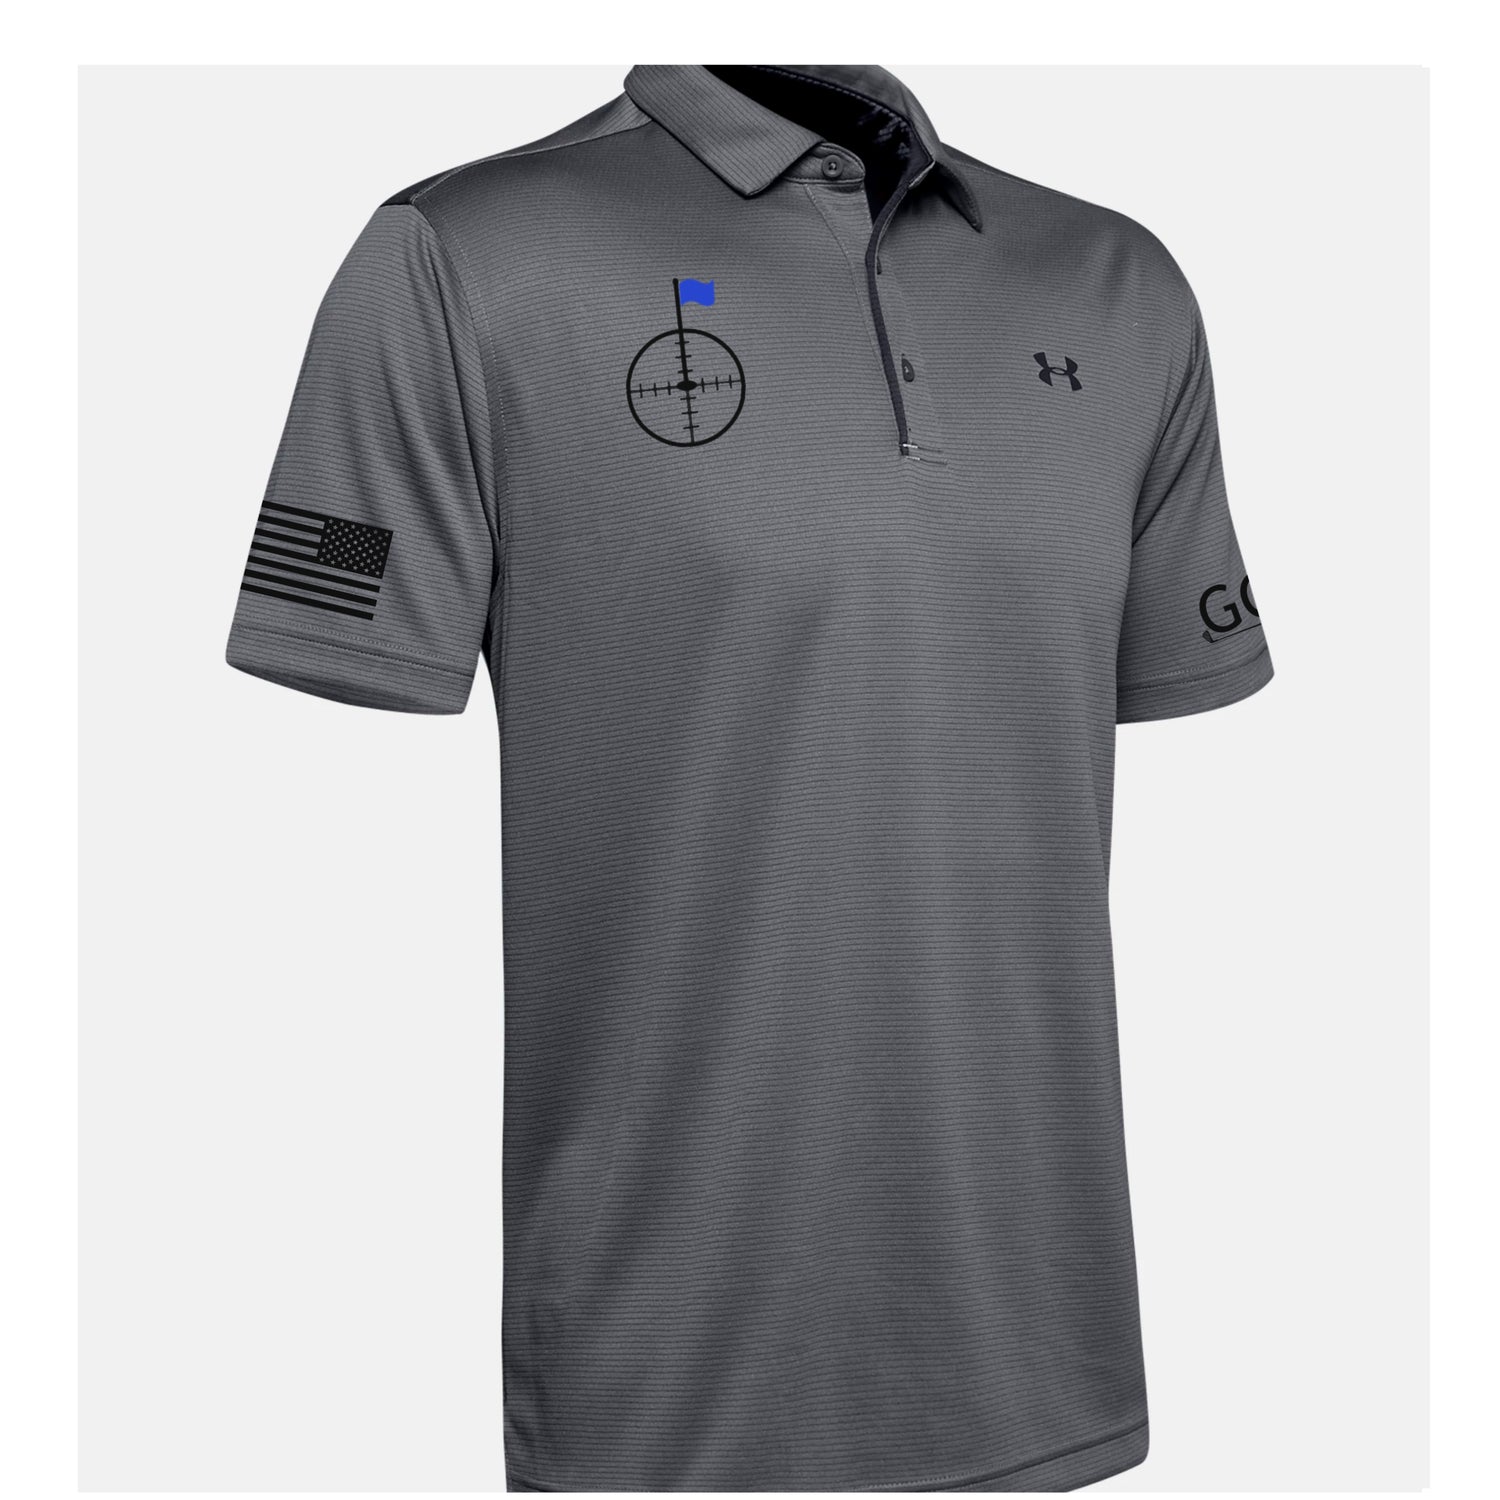 Men’s Target Acquired Polo